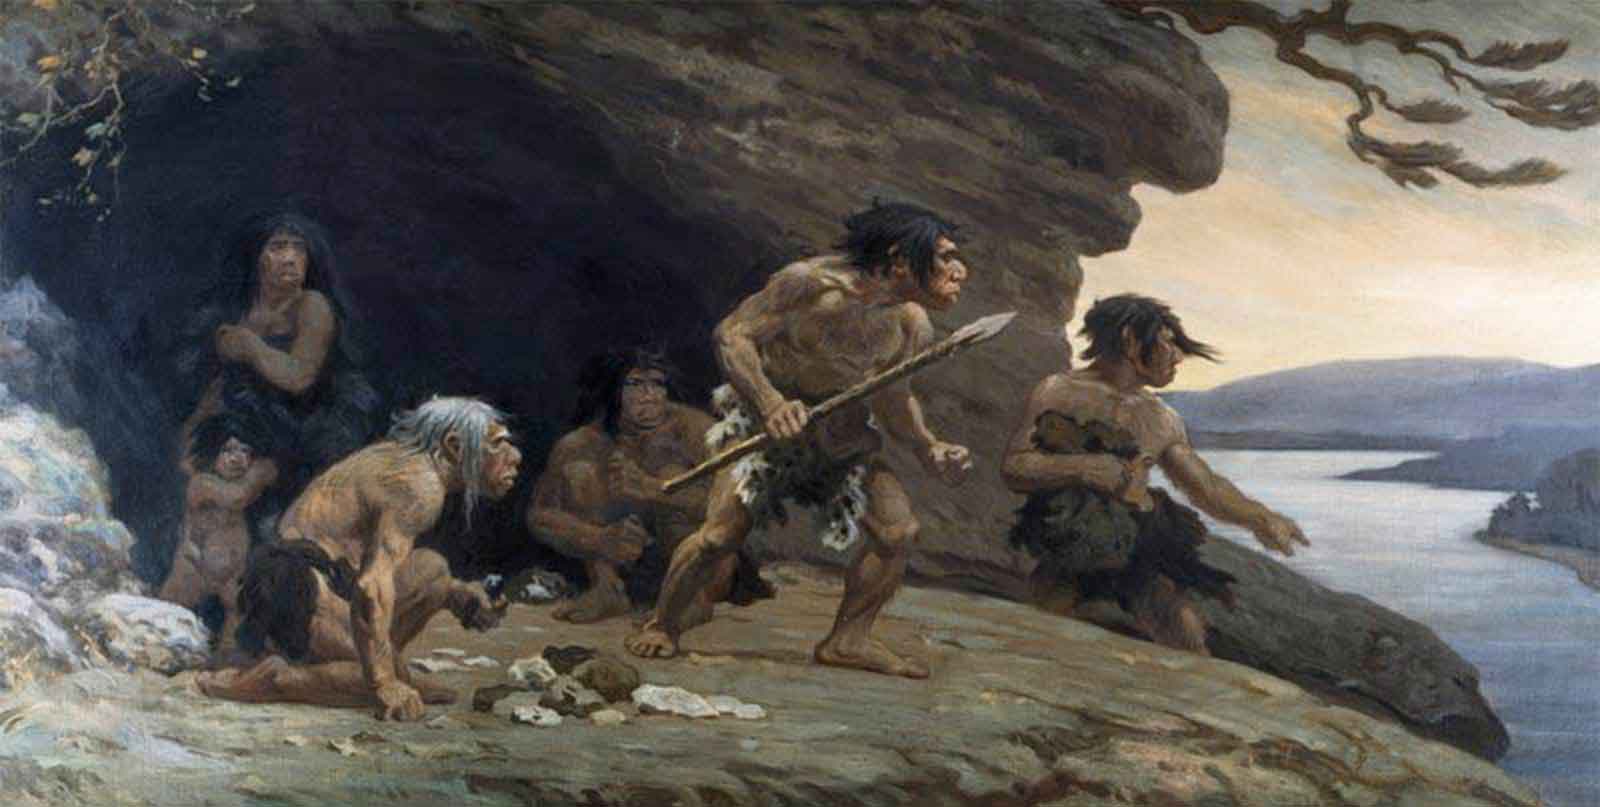 Neandertals standing and squatting outside a cave looking over a valley